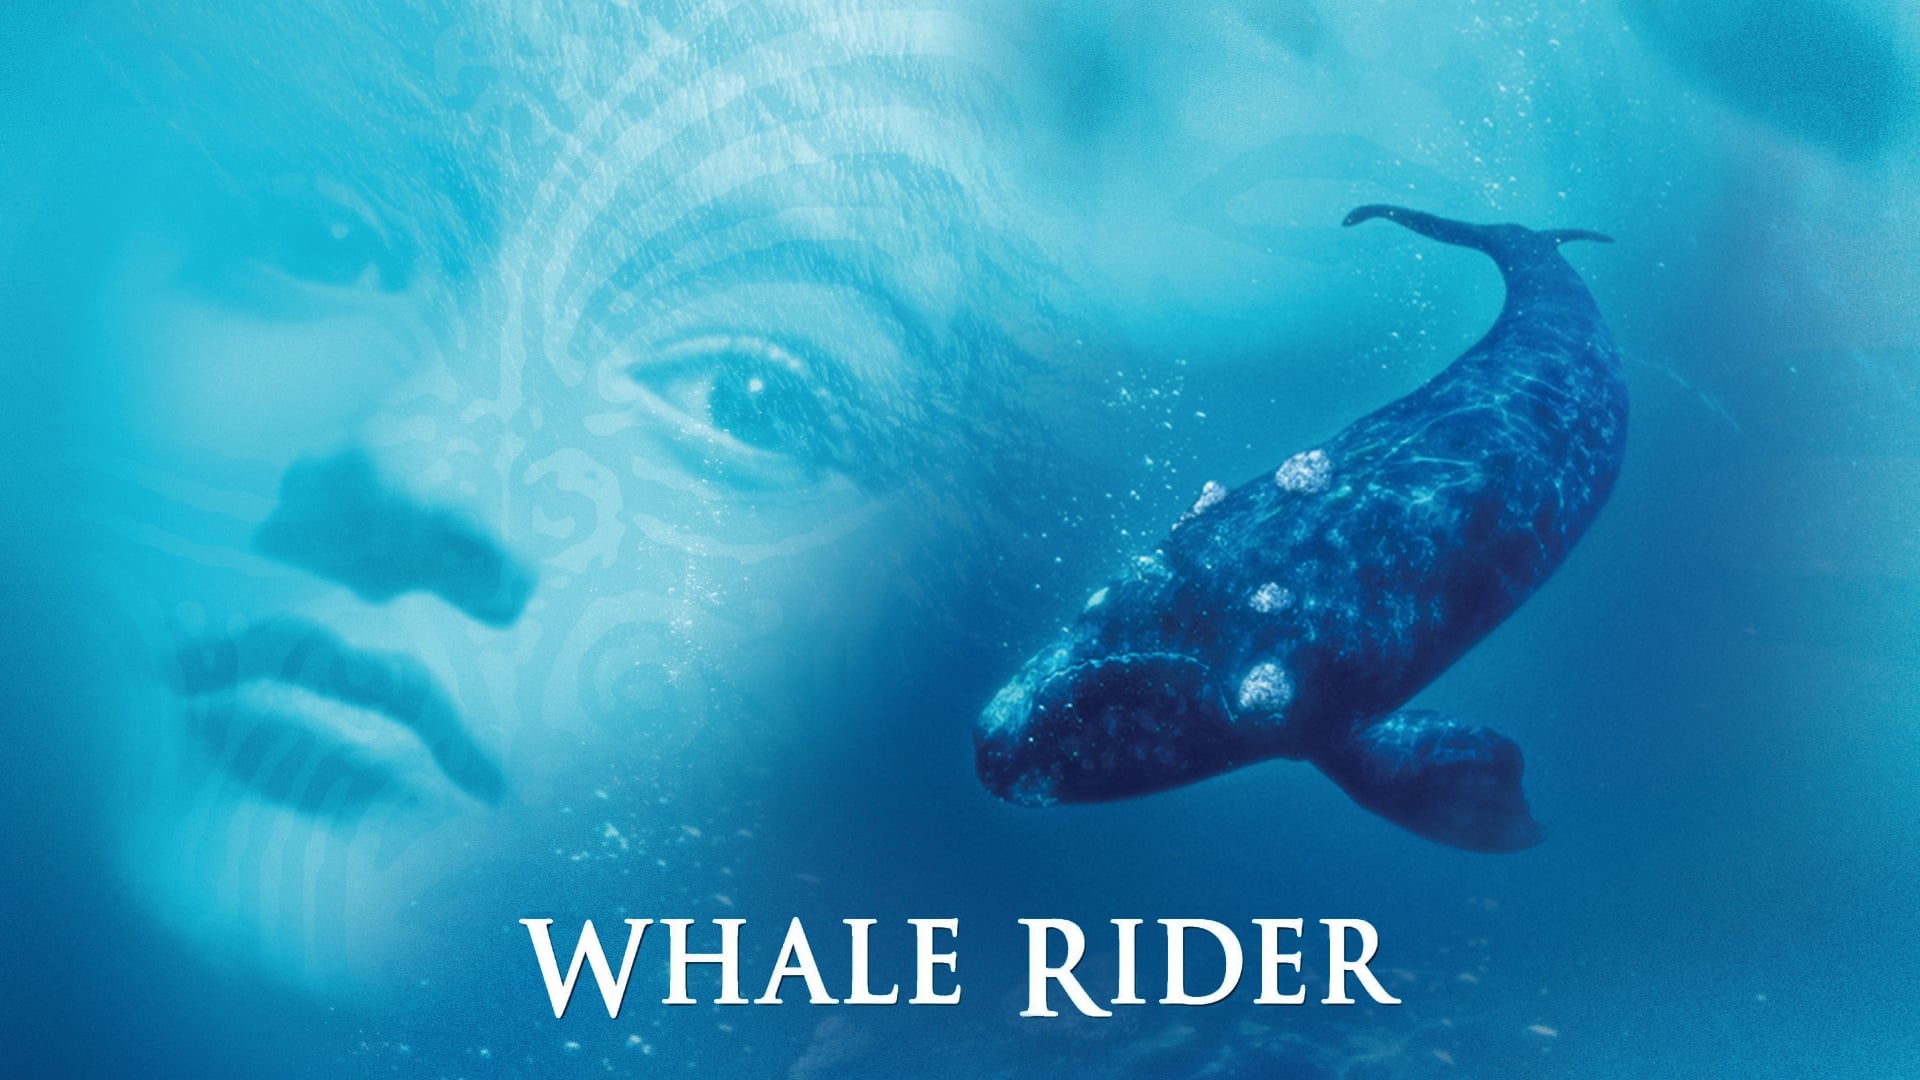 whale rider film review essay